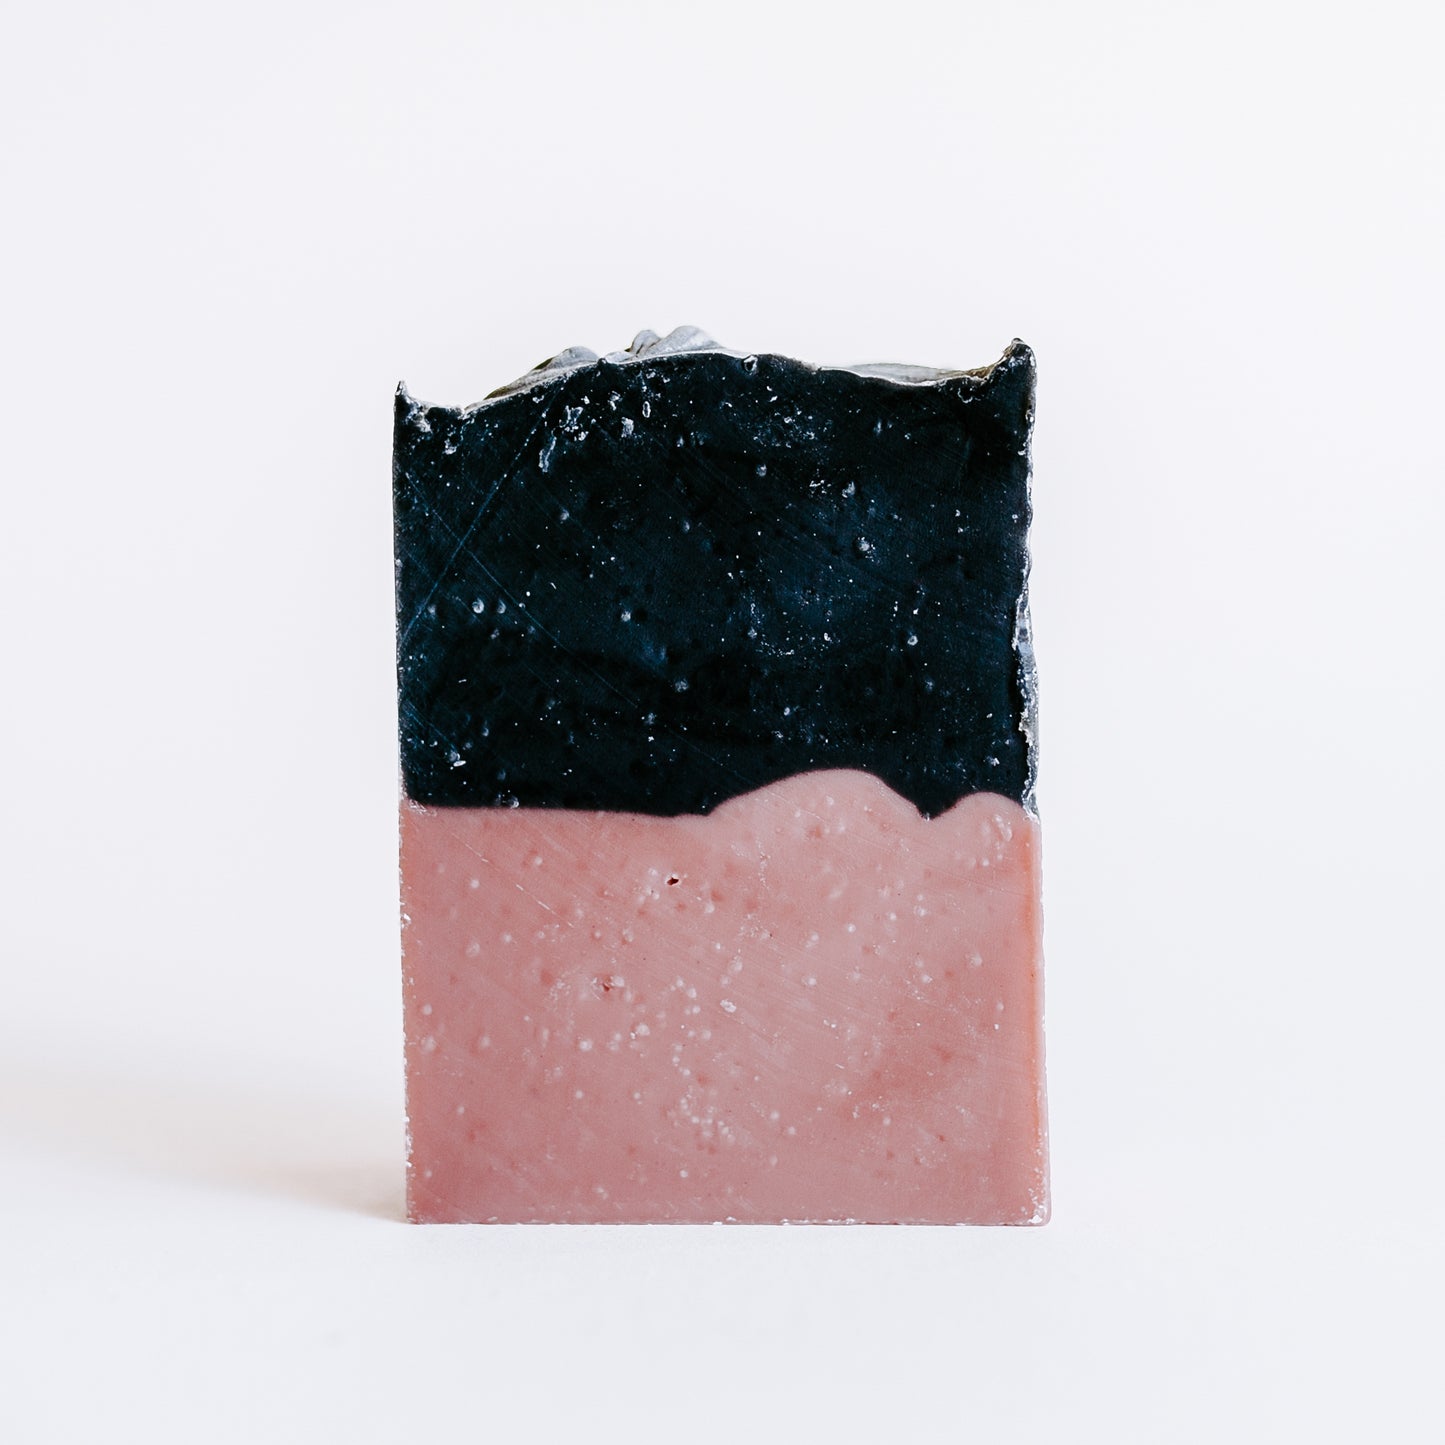 Sixth and Zero beauty from ashes soap without a label 